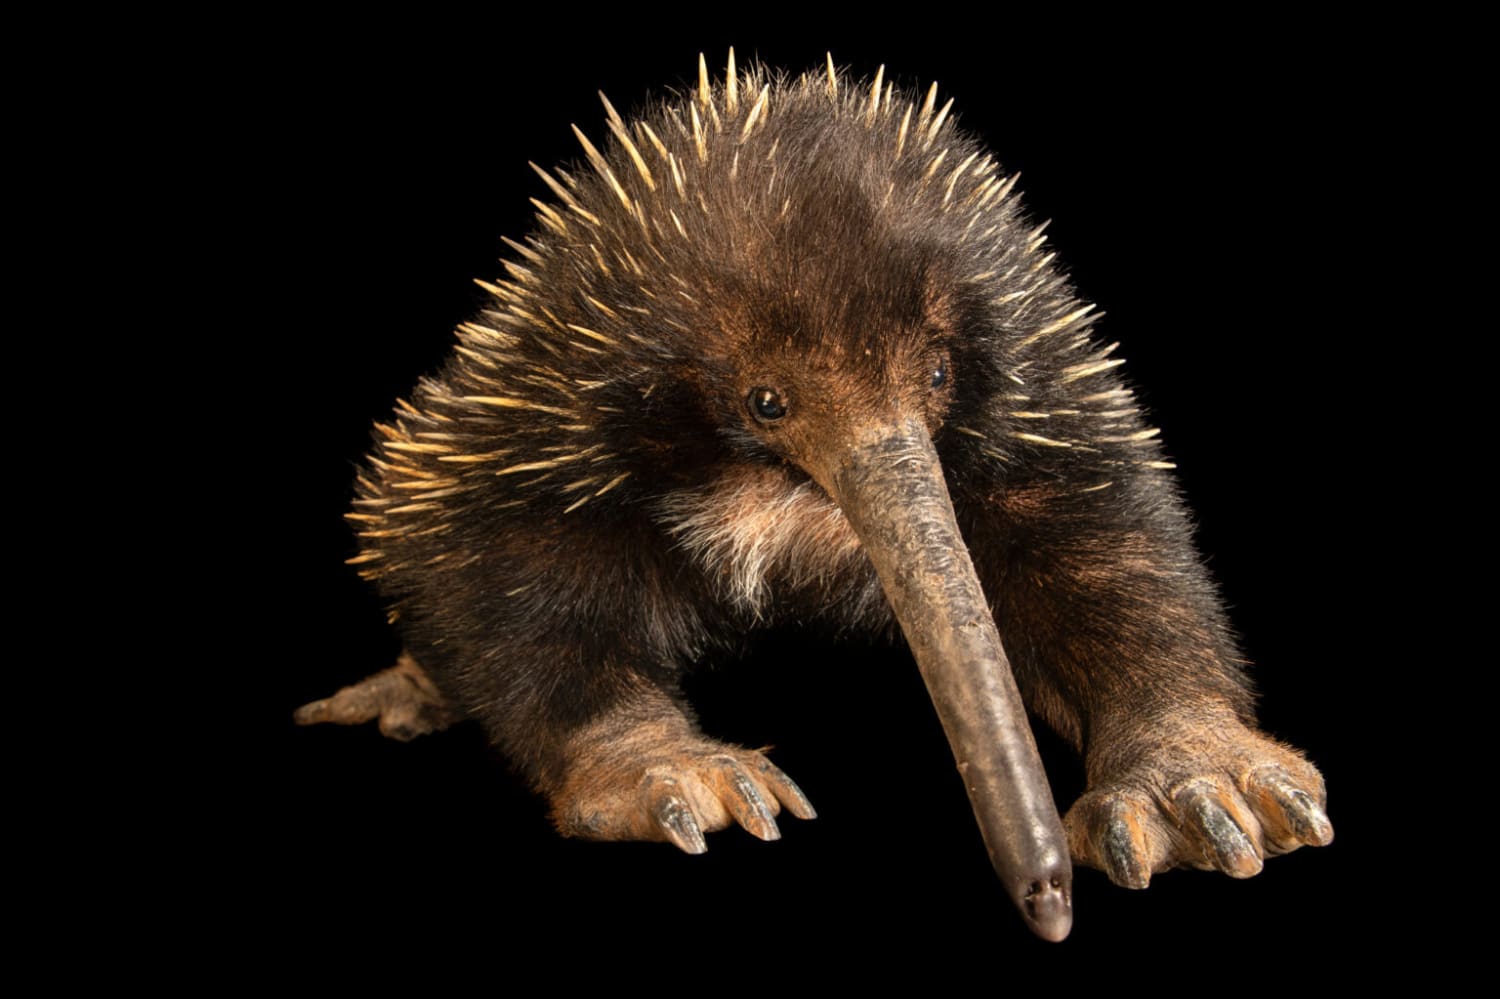 Long beaked echidnas are the largest egg-laying mammals, growing up to 36 lbs. Using their long sensitive snouts covered in electroreceptive cells, they hunt for worms in the rainforests of New Guinea, snagging them with their long barbed tongues.